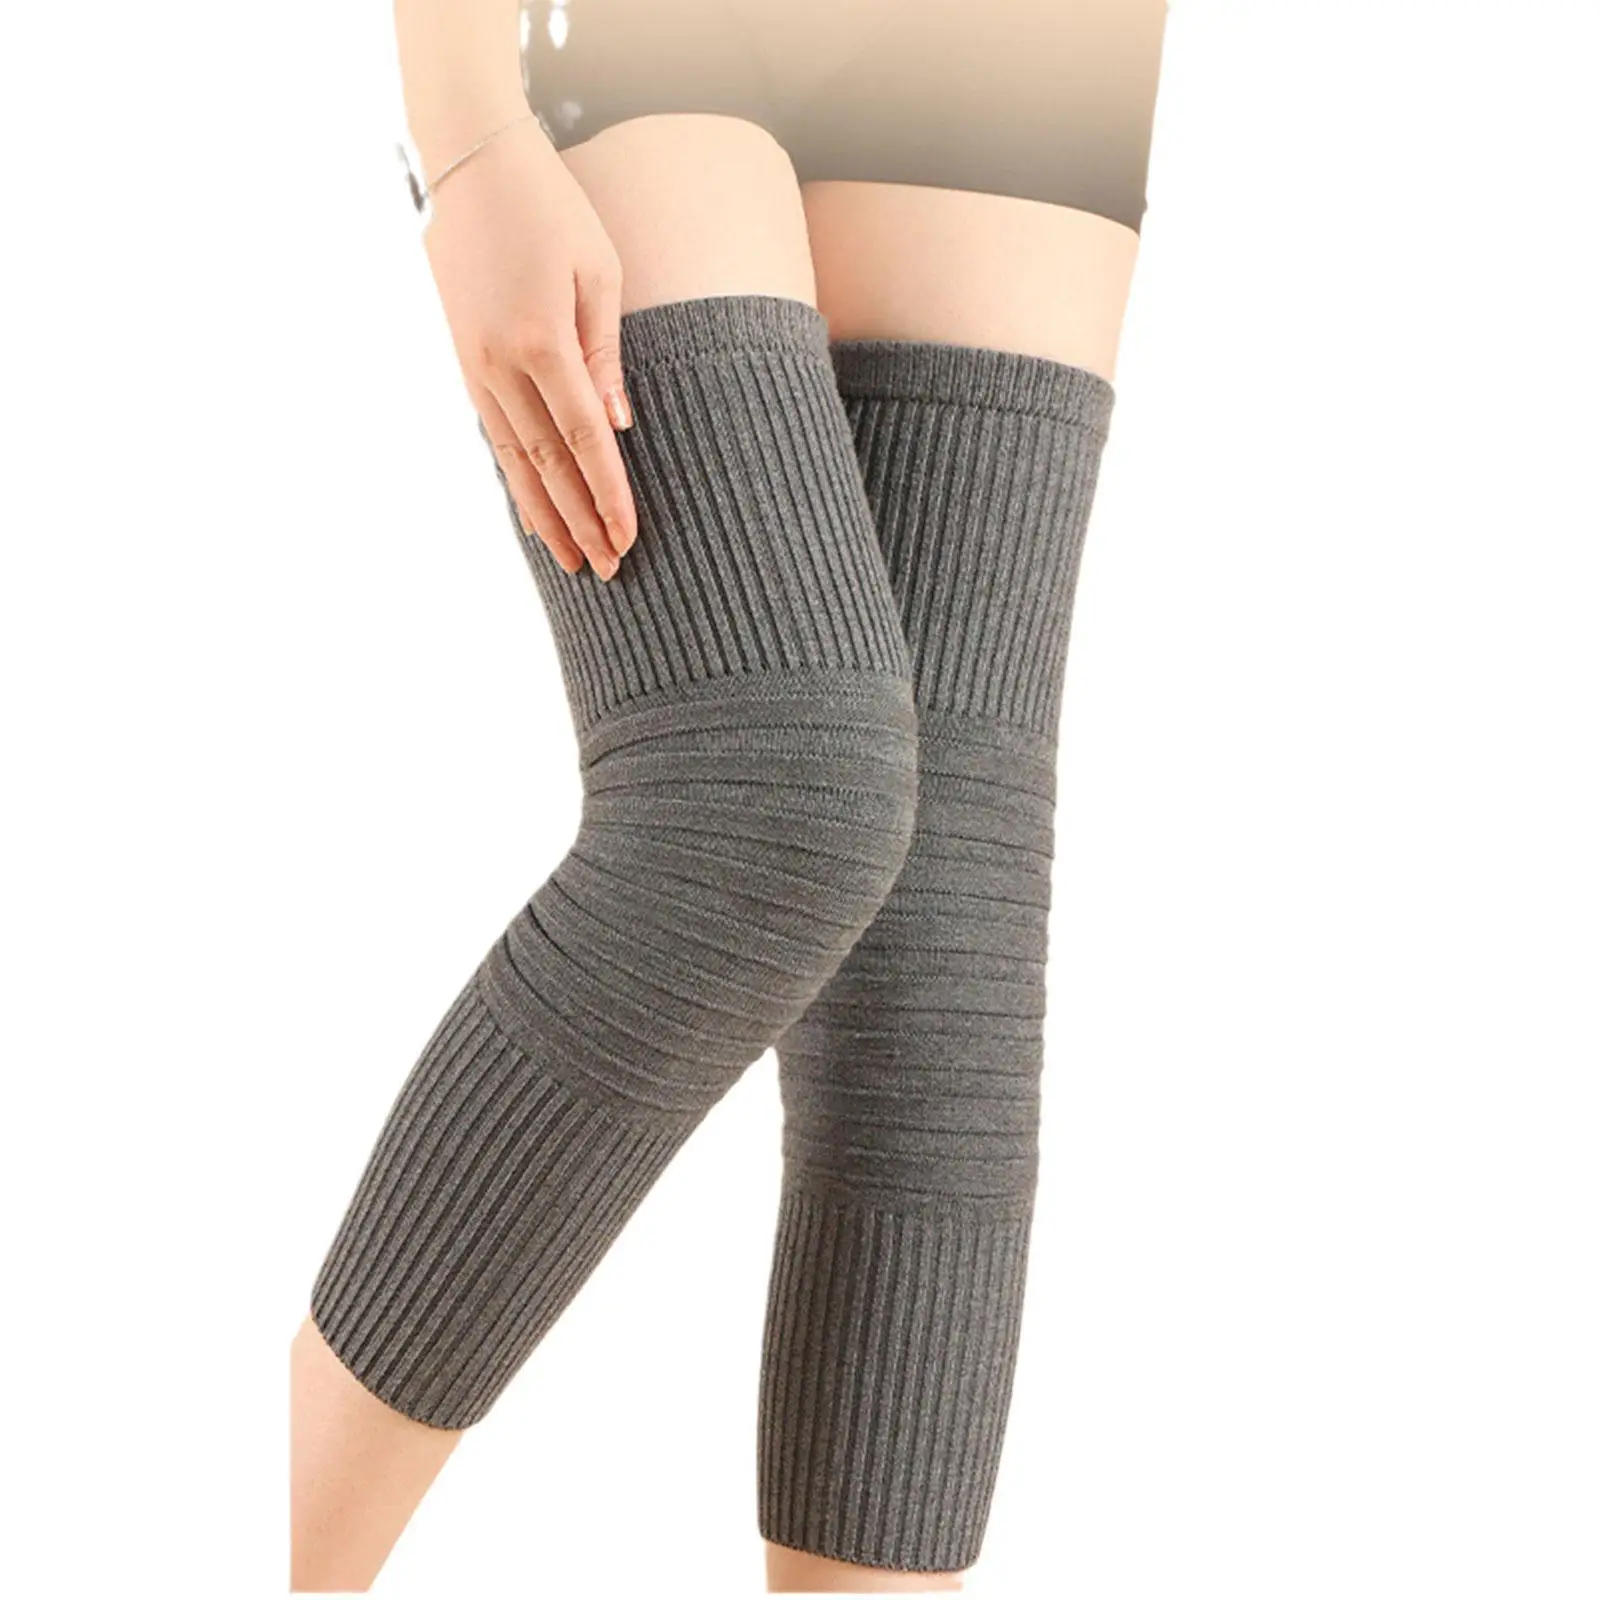 1 Pair Unisex Cashmere Knee Warmers Wool Knee Brace Pads Winter Warm Thermal Knee Protector Sleeve for Women Men Pain Relie I9O9